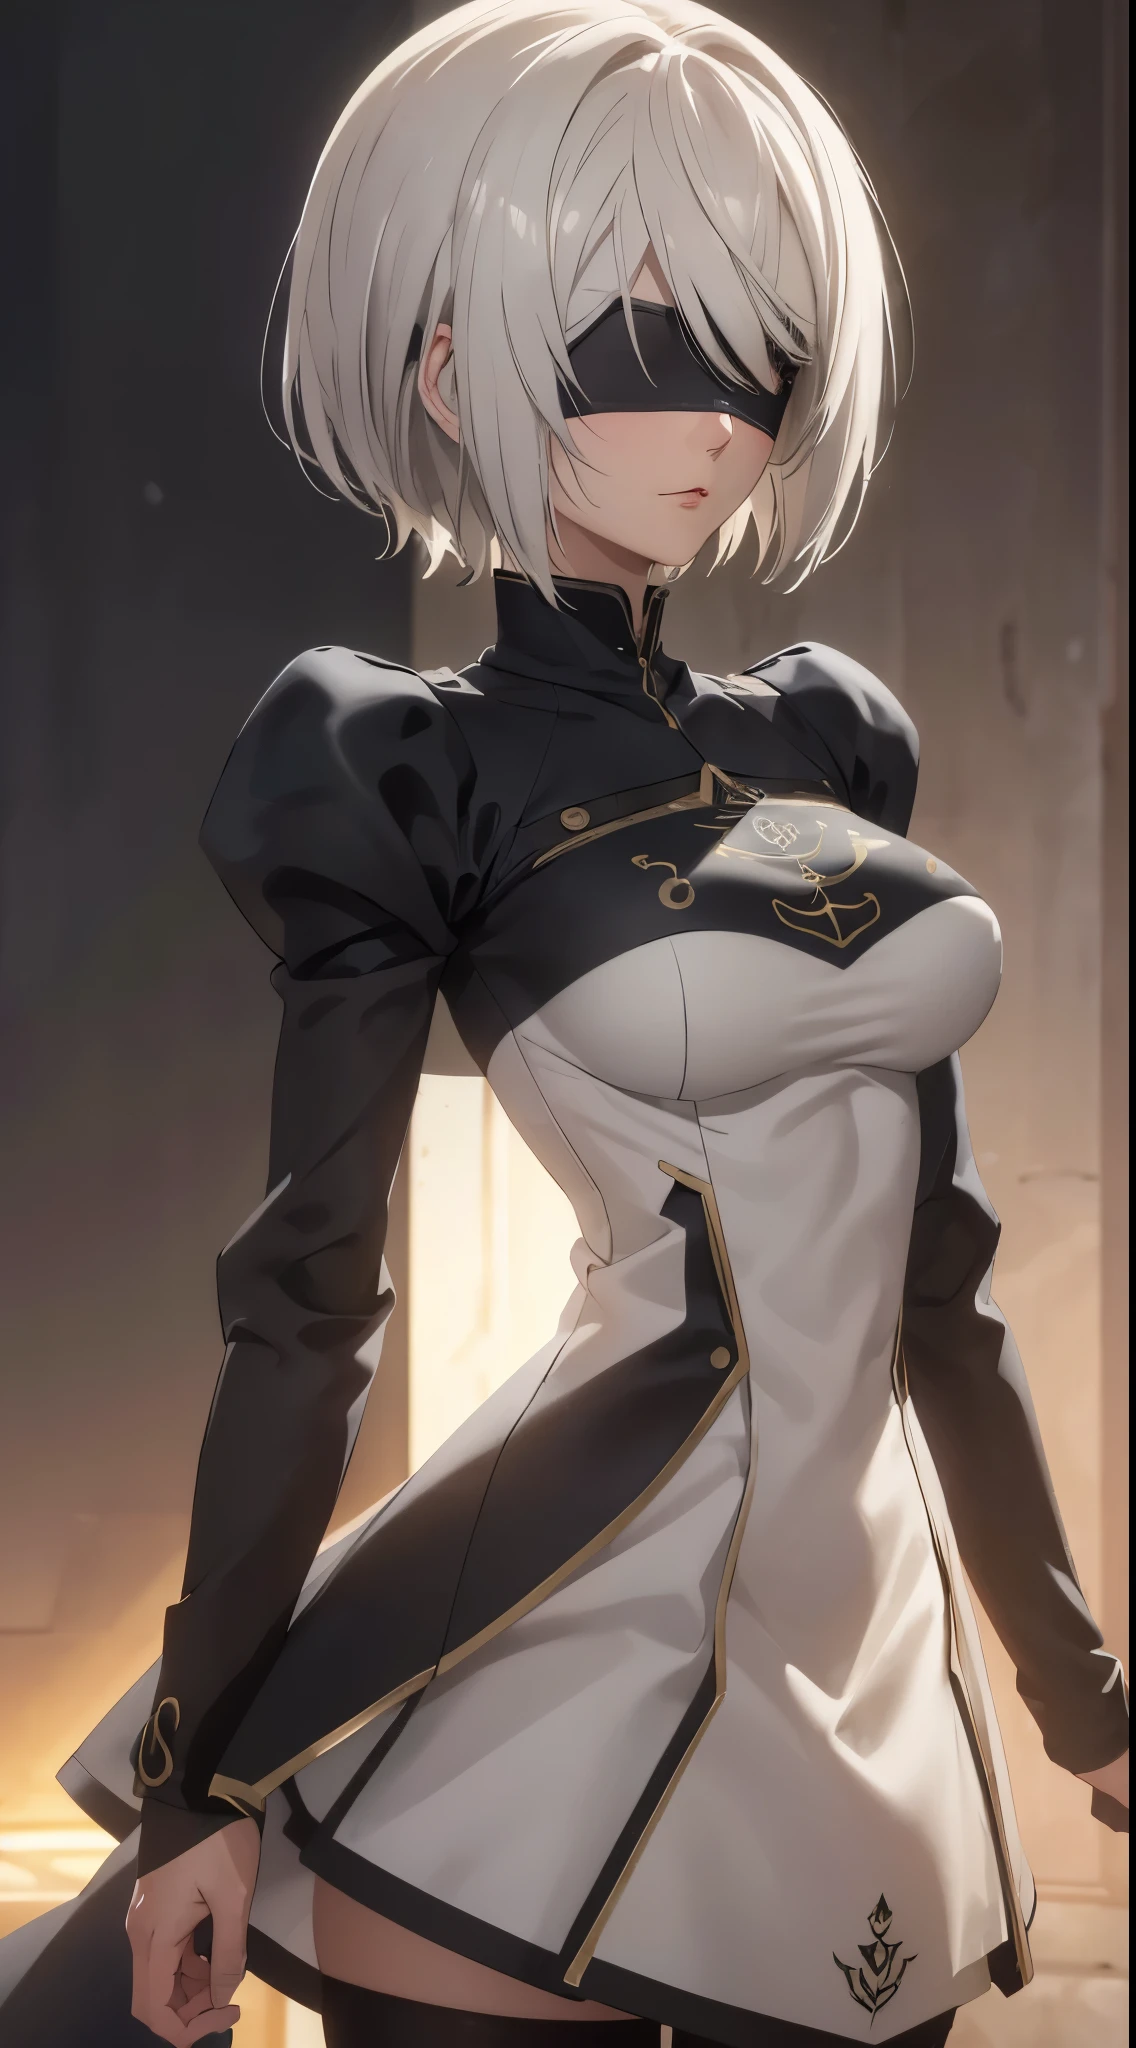 (extremely detailed CG unity 8k wallpaper), (masterpiece), (best quality), (ultra-detailed), (best illustration), (best shadow), (absurdres), 2b, 1girl, short hair, long ponytail, normal size , white hair, blindfold solo, Intimidating women, admiral uniform, night, hero pose, white clothes, General Uniform, Military Uniform, Sunlight, exposed to sunlight,commander, cape, fighting, ((beautiful fantasy girl)), (Master Part: 1.2), Best Quality, High Resolution, photorealestic, photogenic, Unity 8k Wallpaper, perfect lighting, (perfect arms, perfect anatomy) beatiful face, intricate details, lifelike details, the anime, The Perfect Girl, perfect details, ultra HD |, 8k, Professional photo